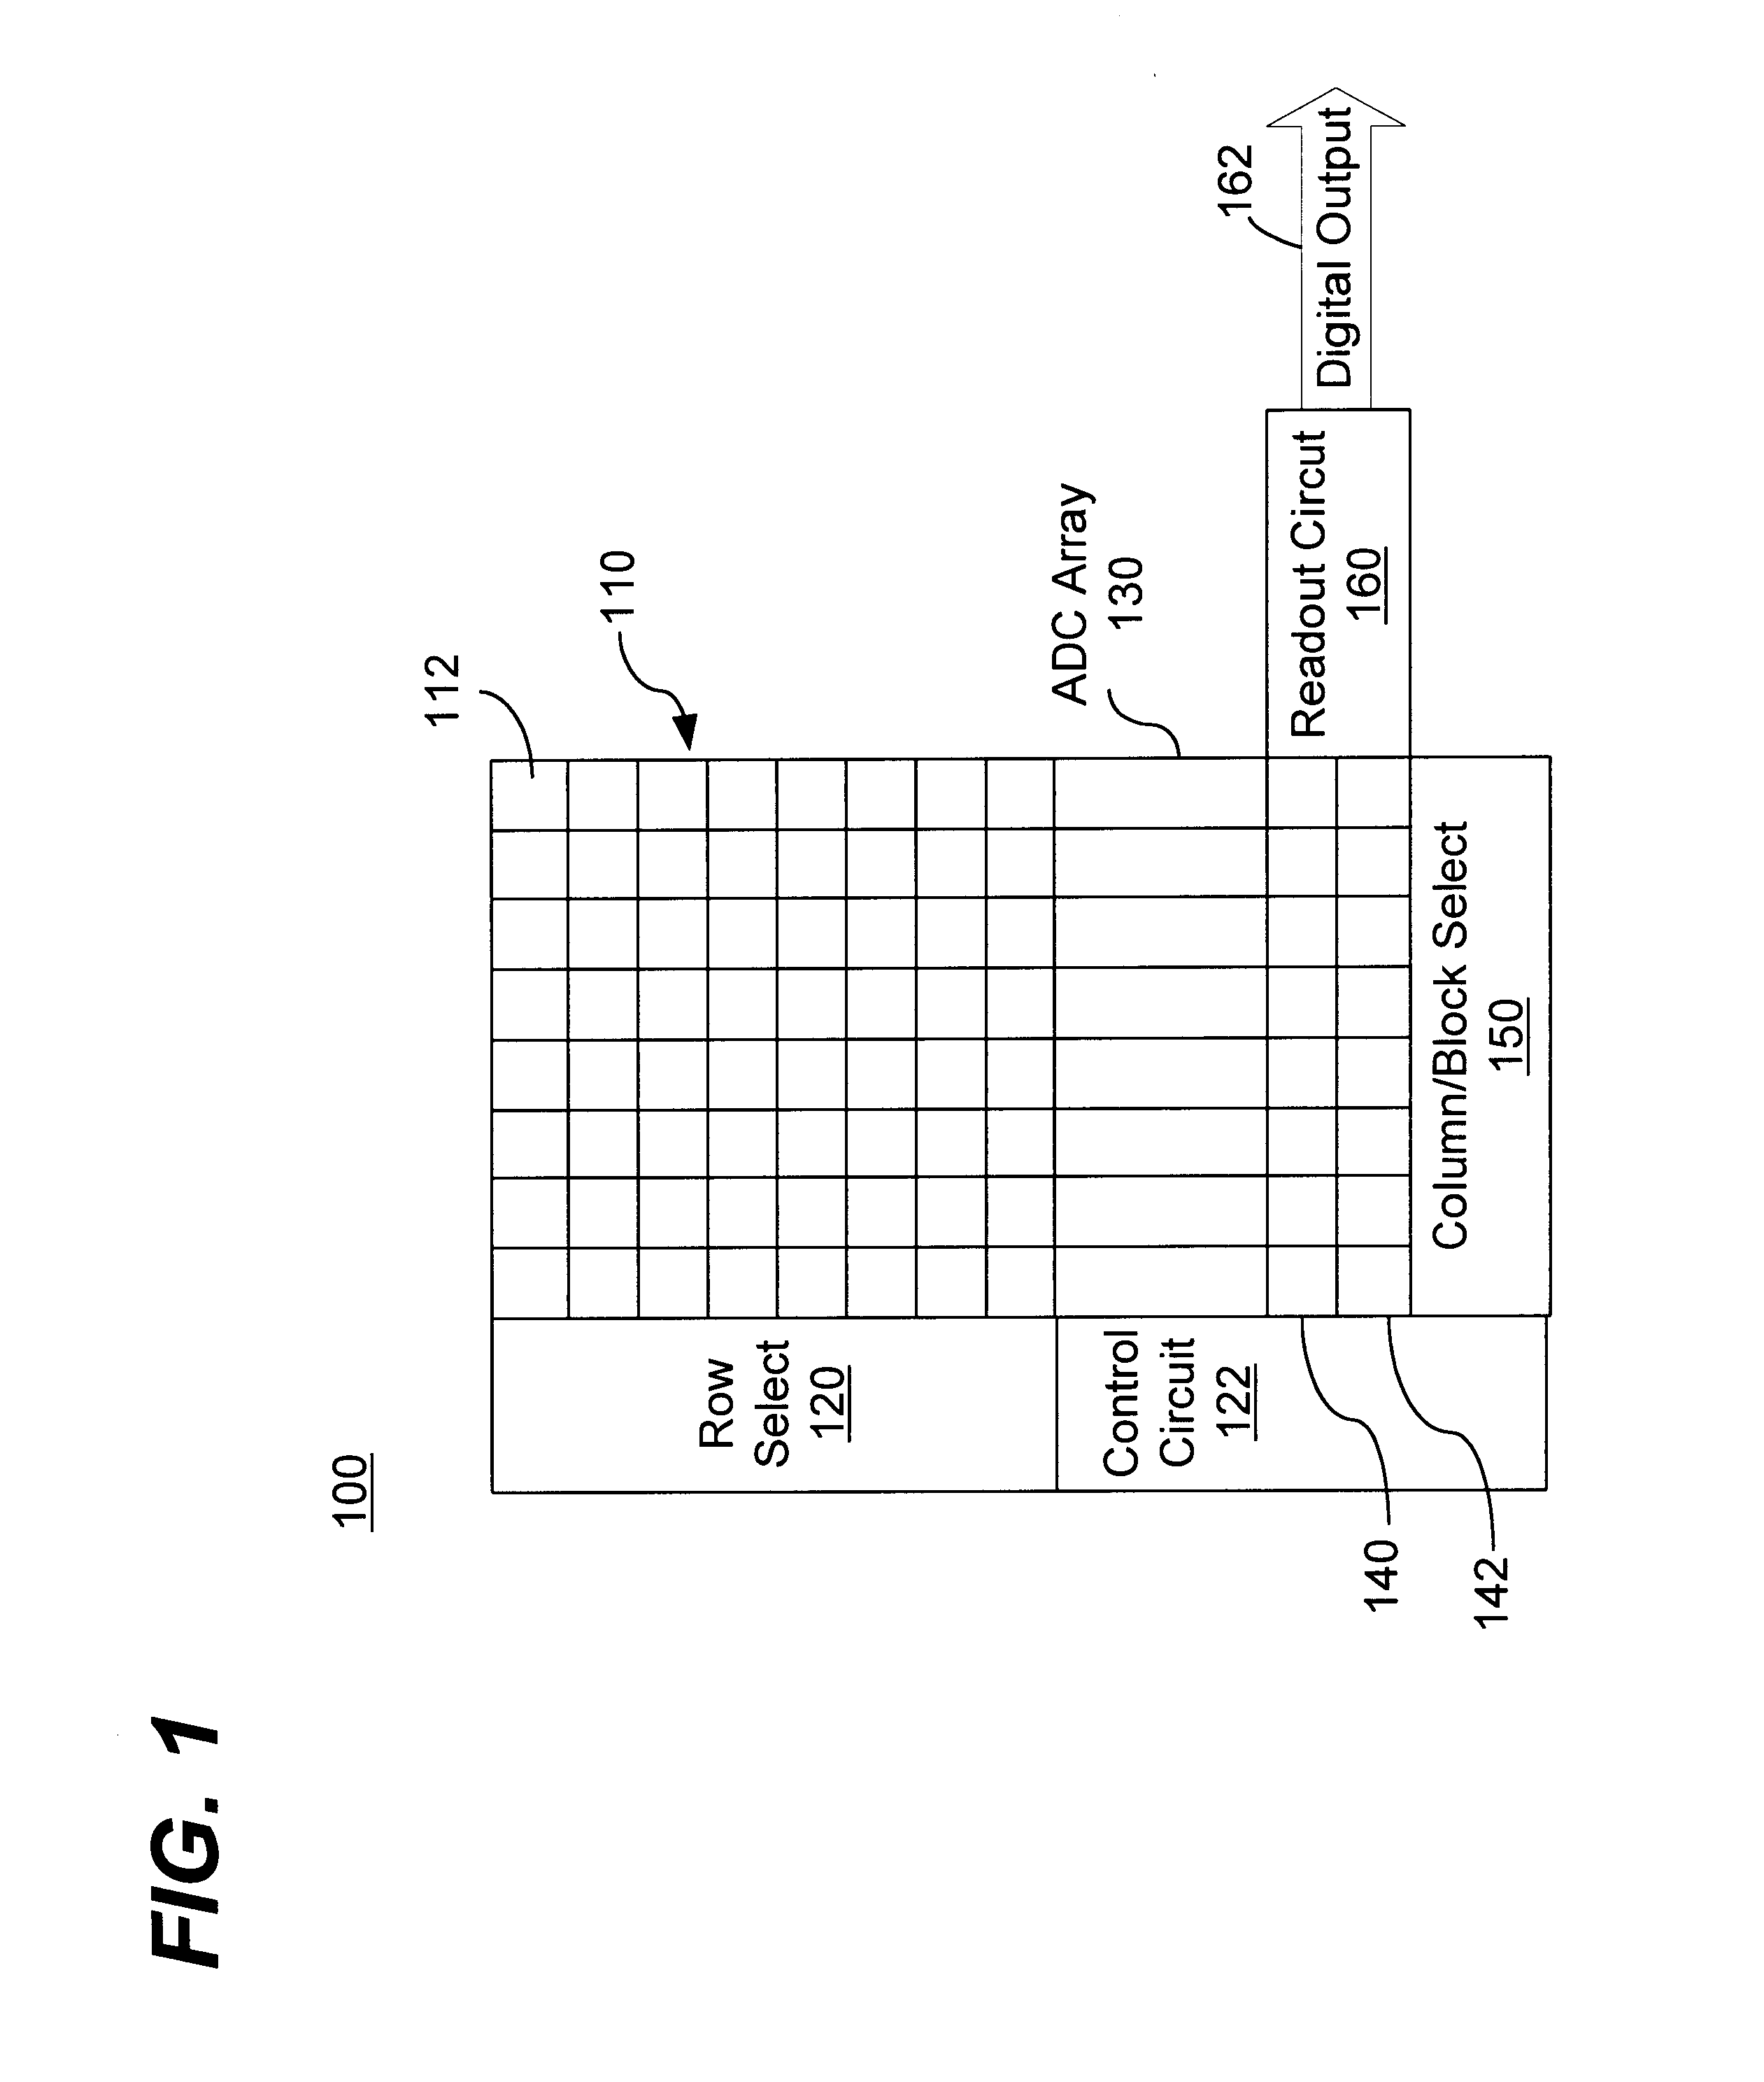 Semiconductor imaging sensor array devices with dual-port digital readout